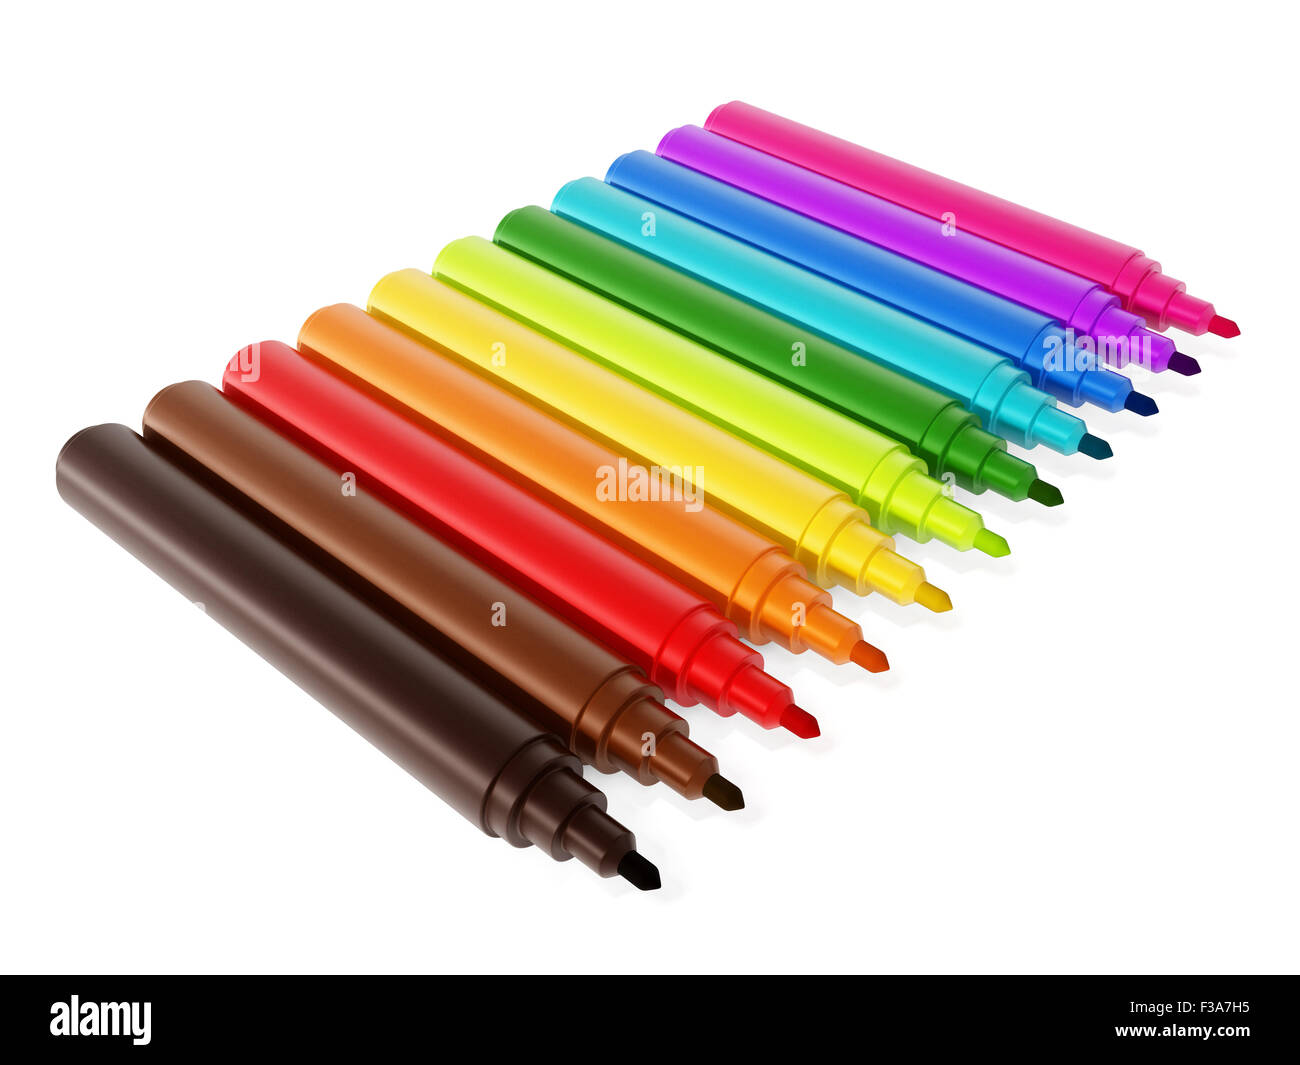 https://c8.alamy.com/comp/F3A7H5/color-marker-color-pen-set-isolated-on-white-background-F3A7H5.jpg